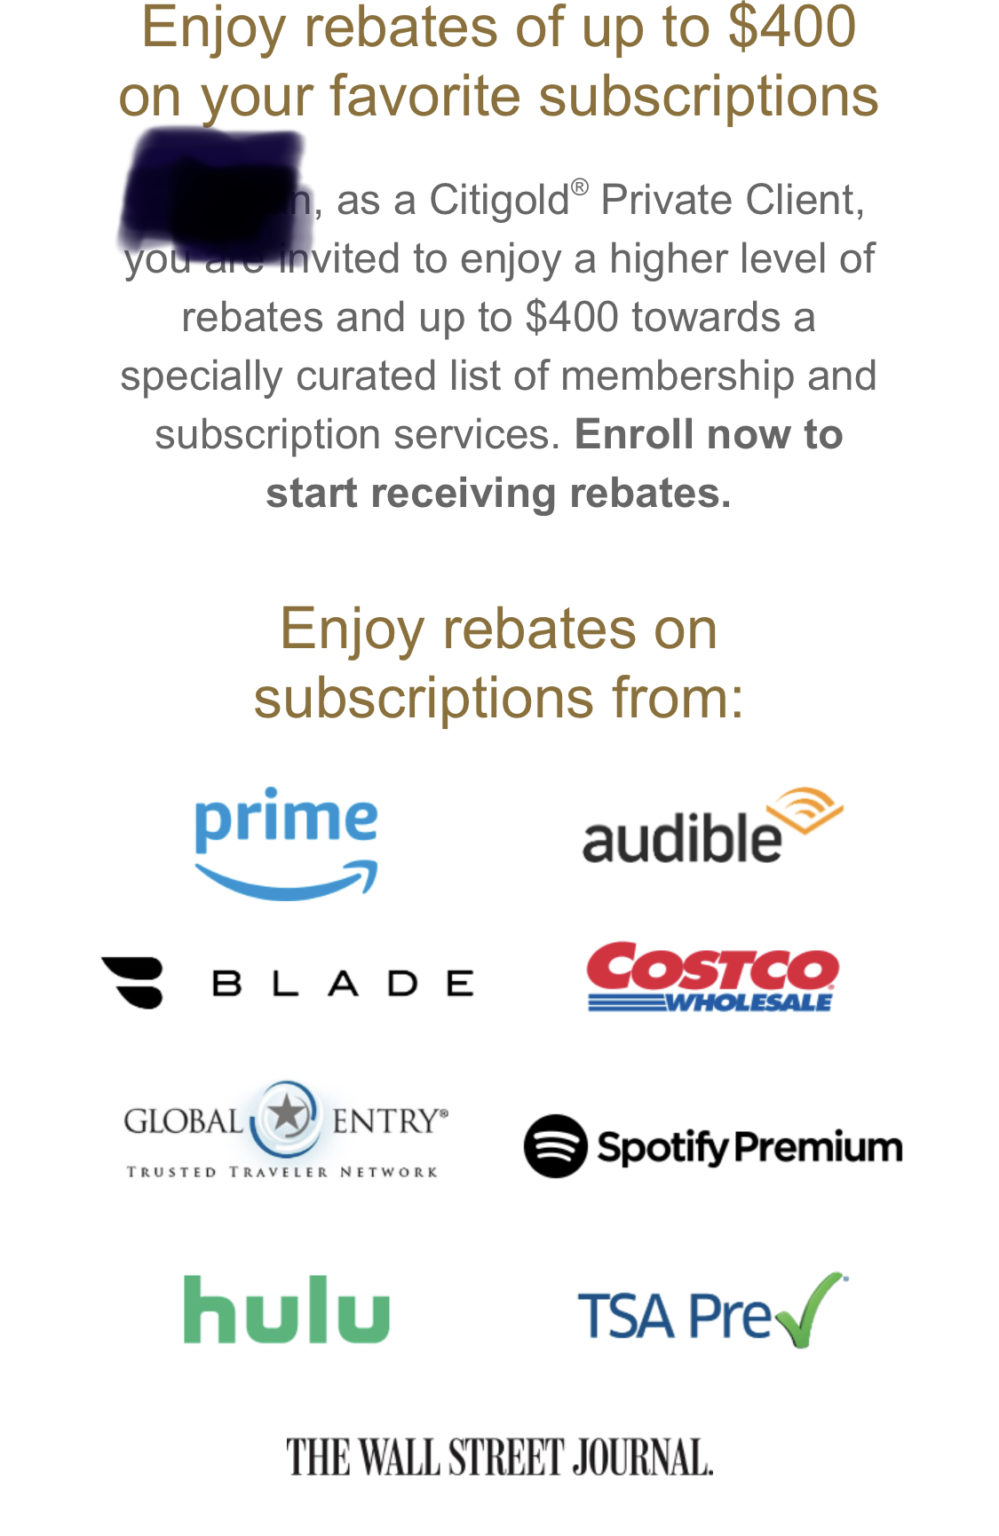 citigold-adds-200-400-annual-benefit-for-subscriptions-to-amazon